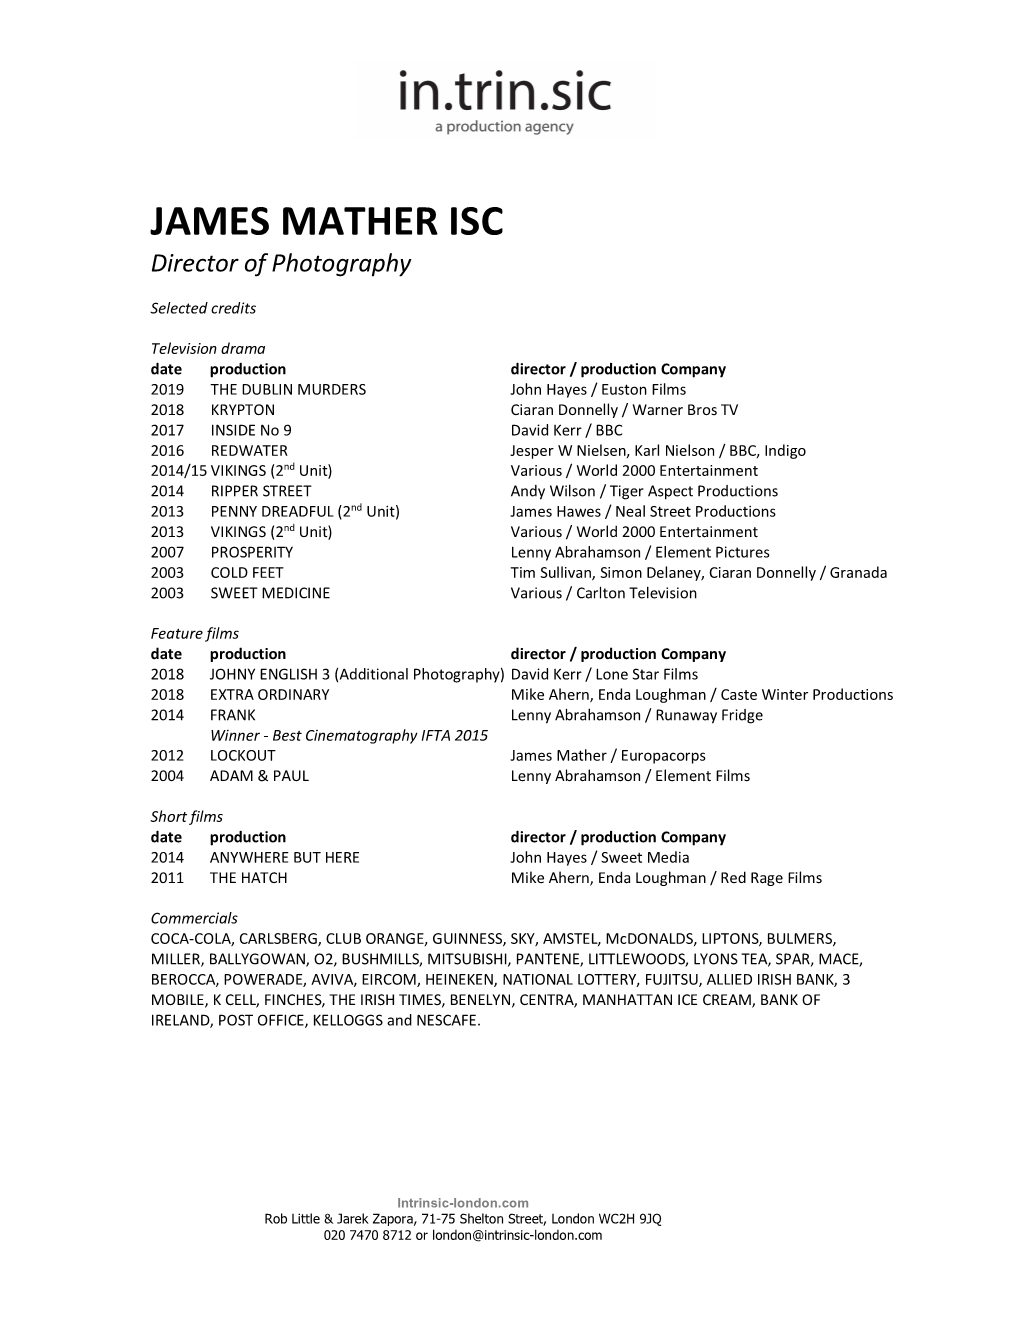 JAMES MATHER ISC Director of Photography